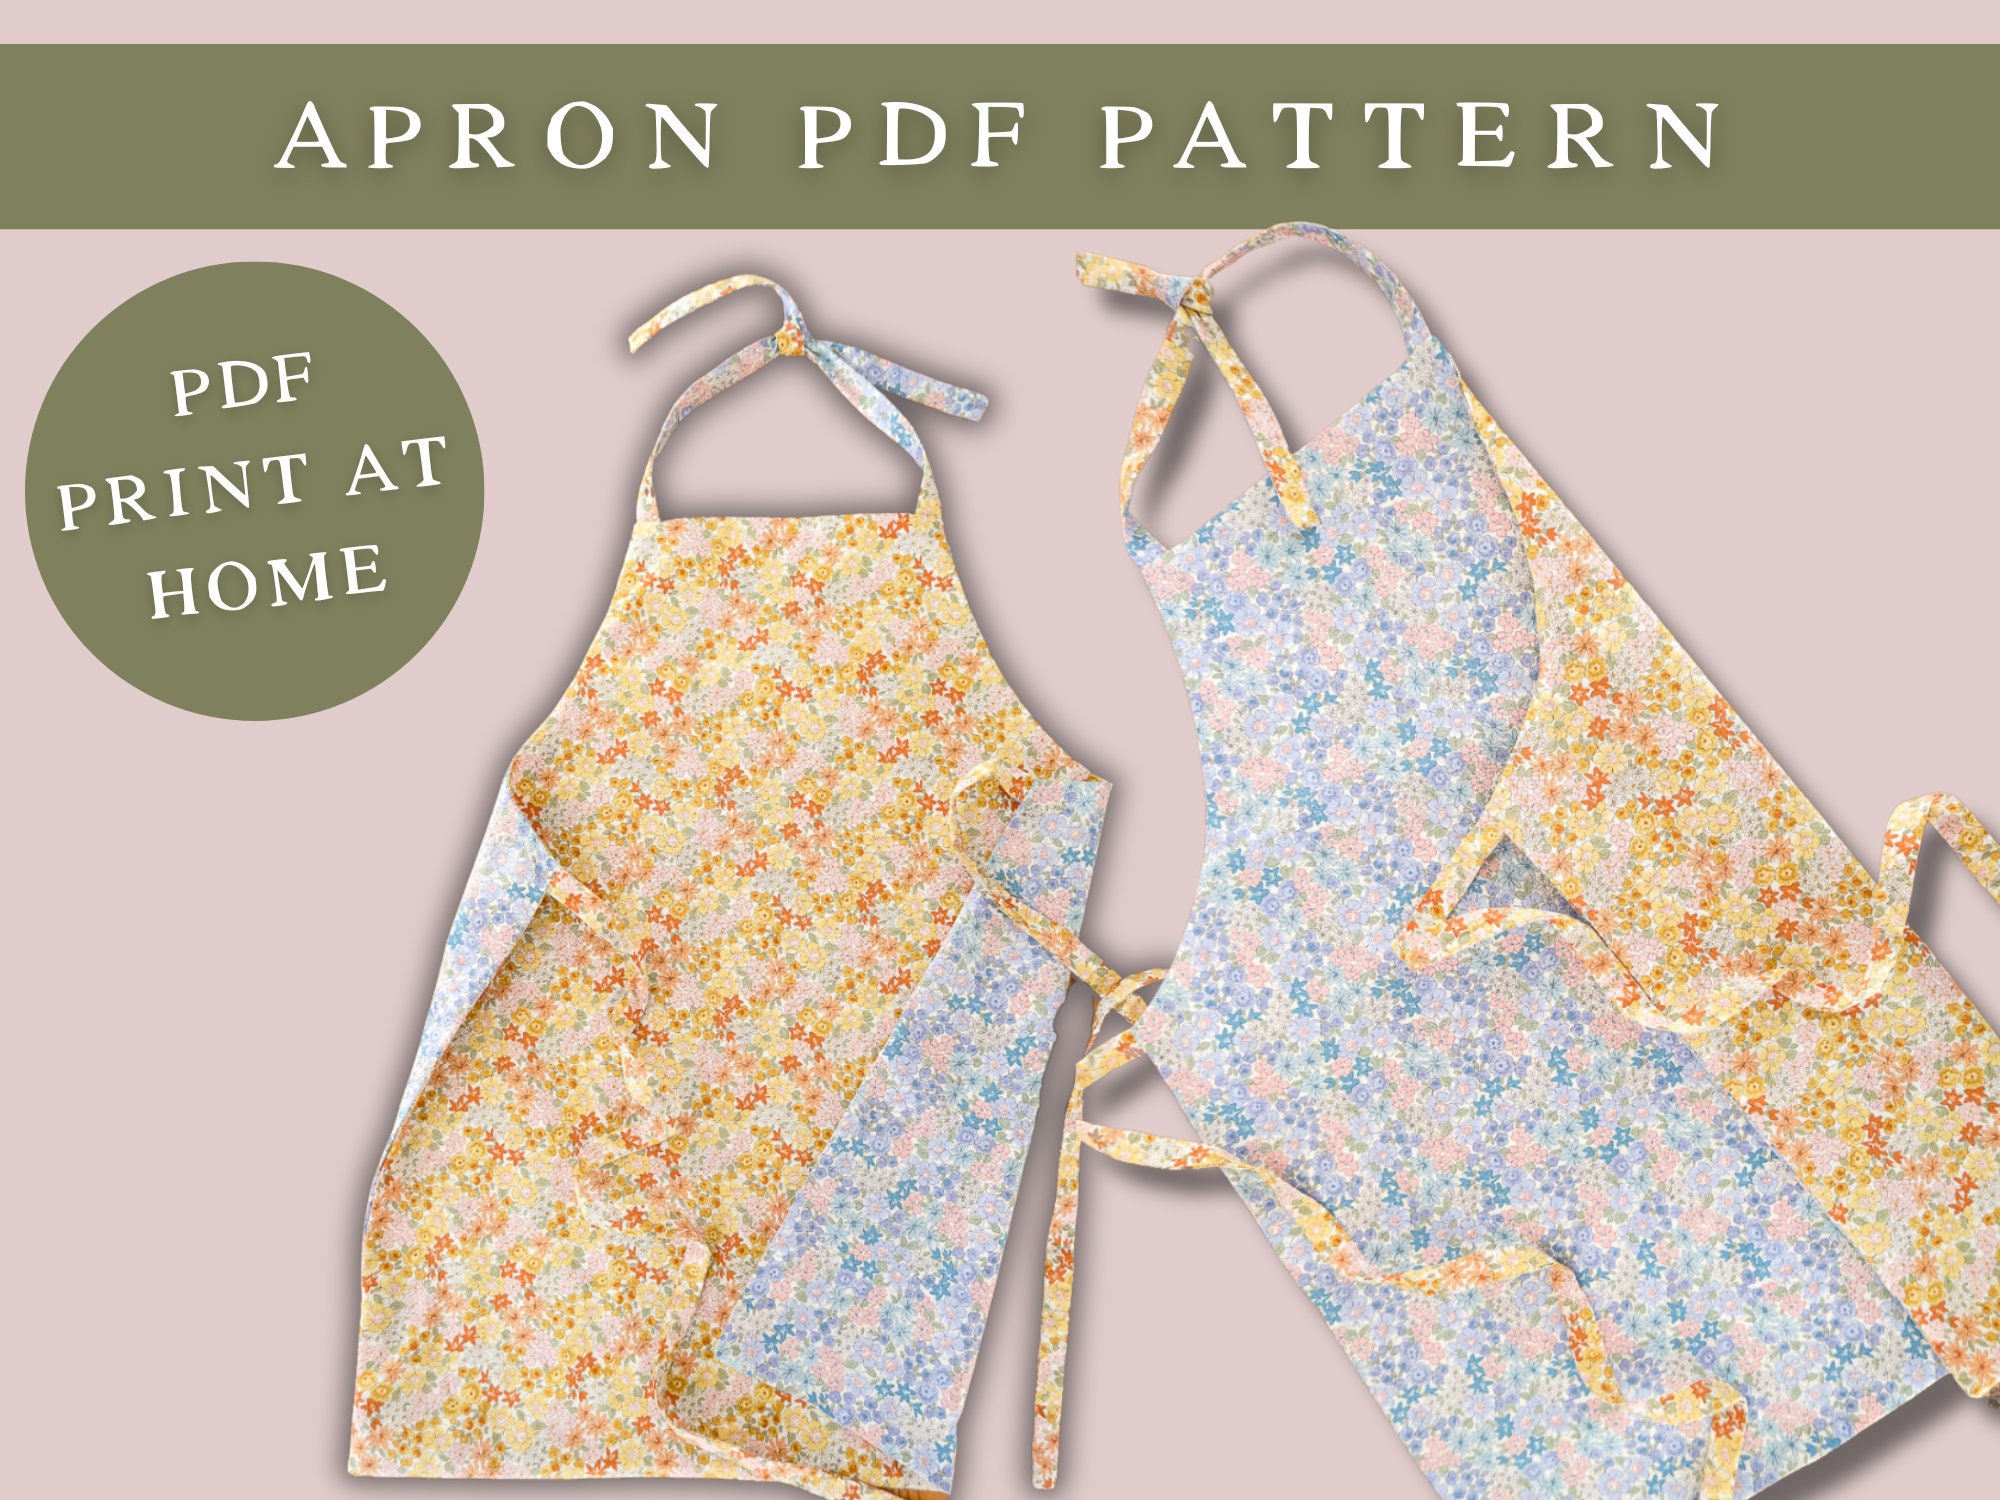 Easy Apron Patterns  The Sewing Room Channel 